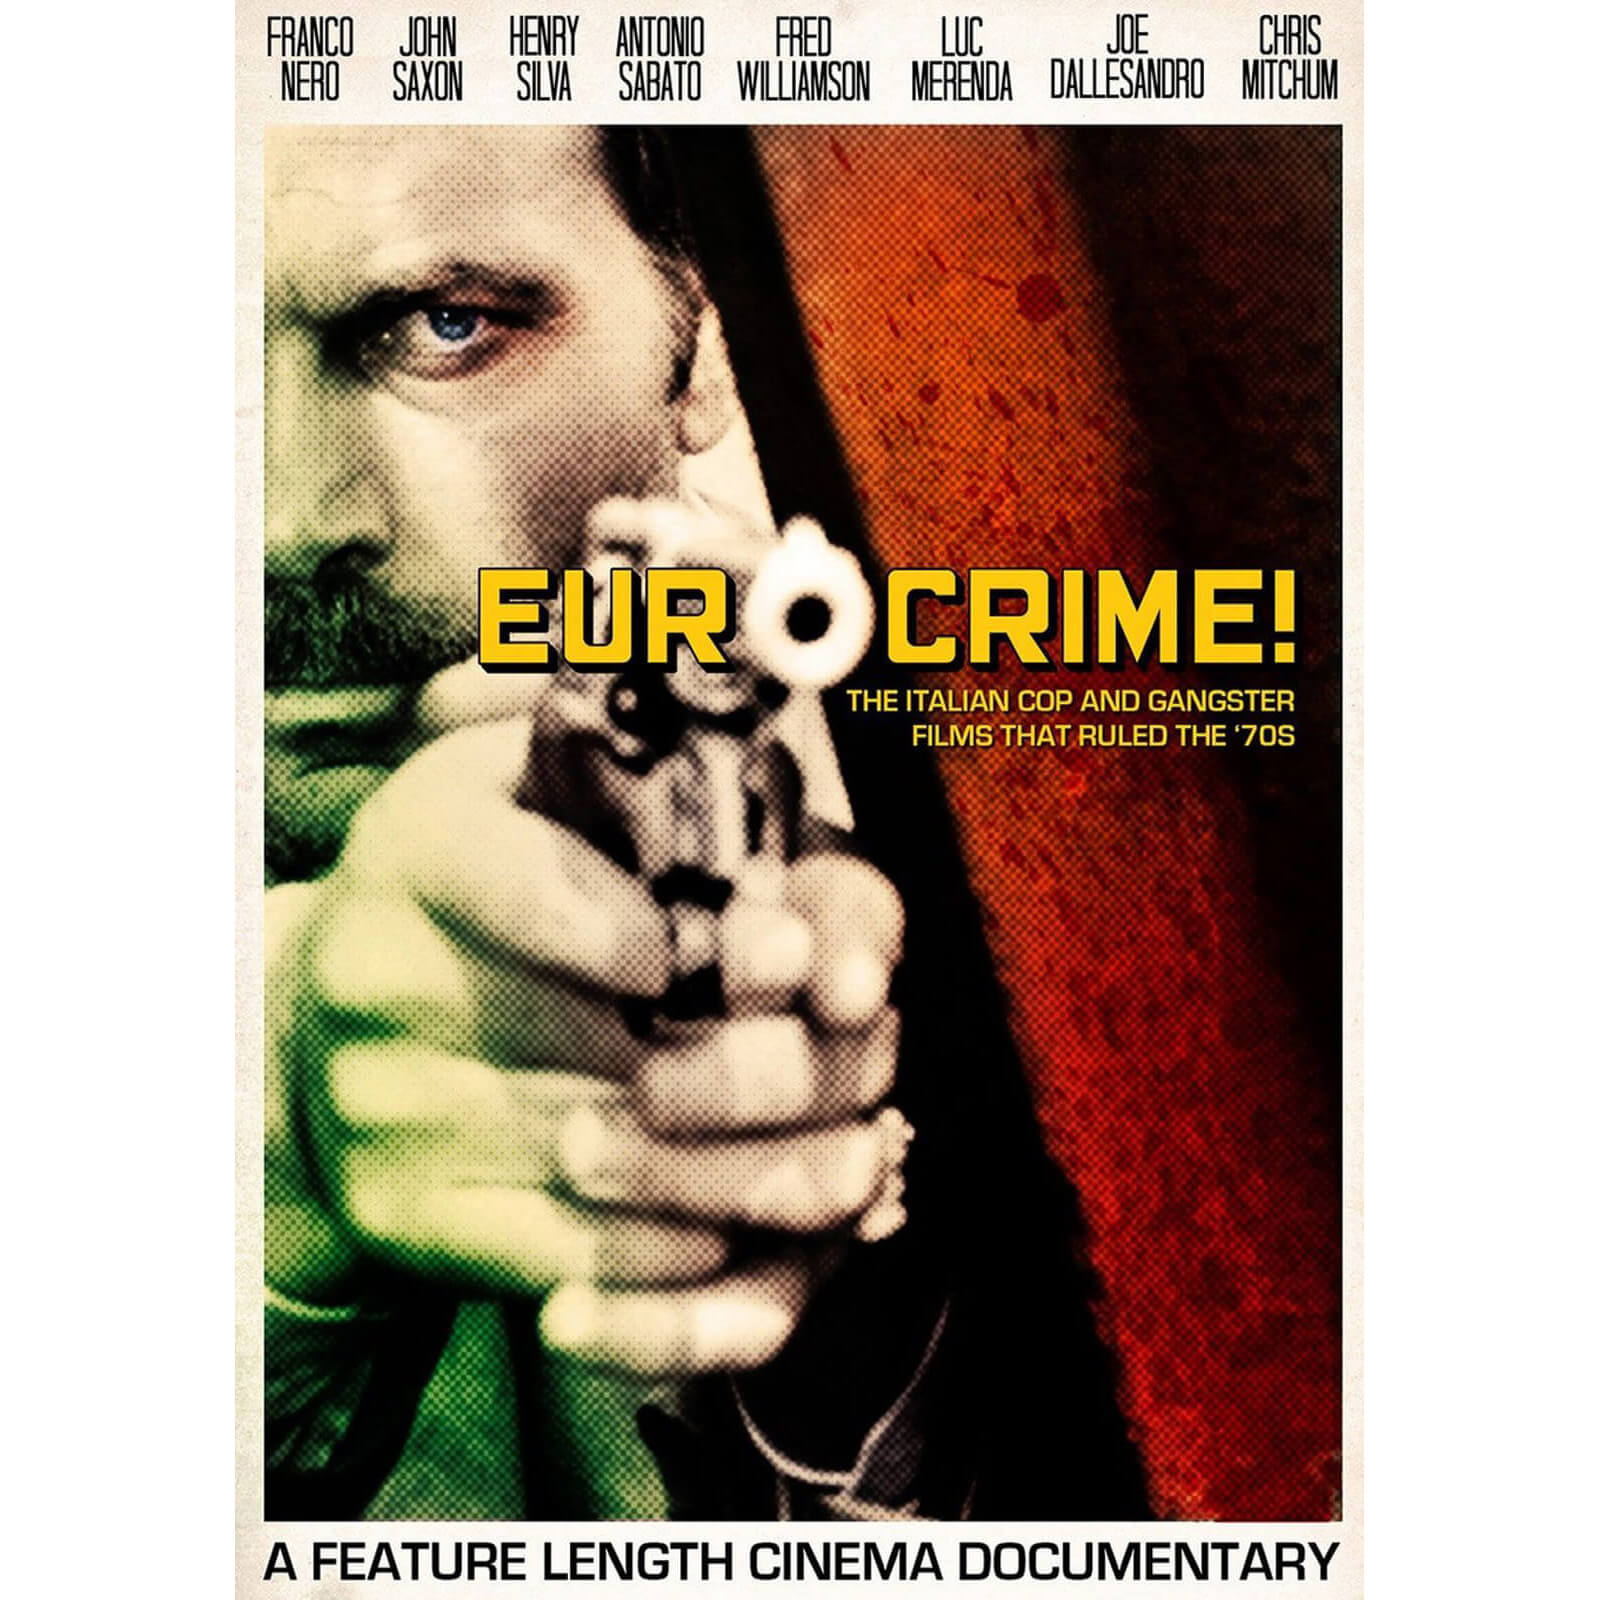 Eurocrime! The Italian Cop & Gangster Films That Ruled the 70's